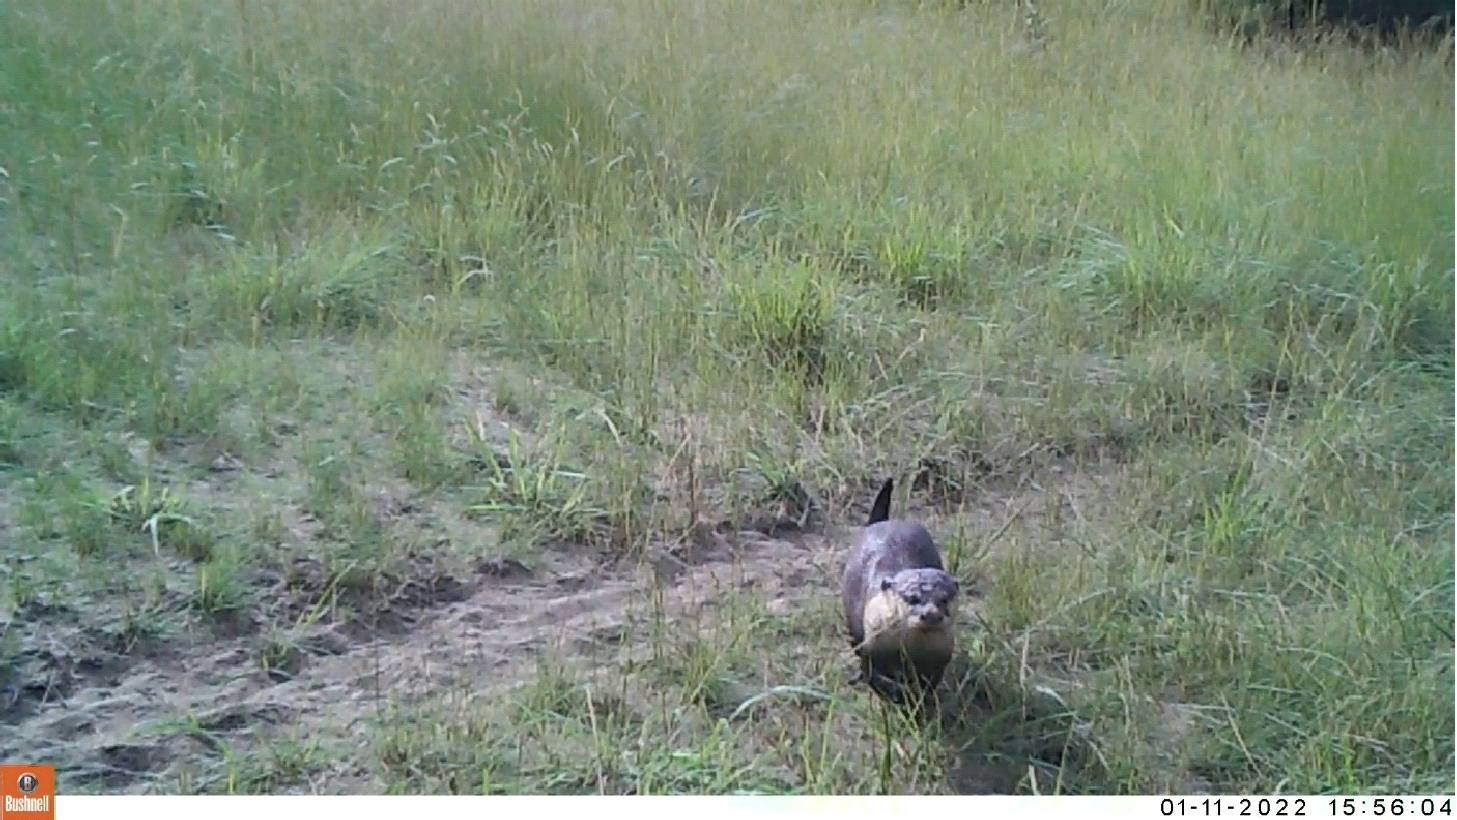 2020A-160 White Cheeked Otter Caught on Camera Trap 11 Jan 2022